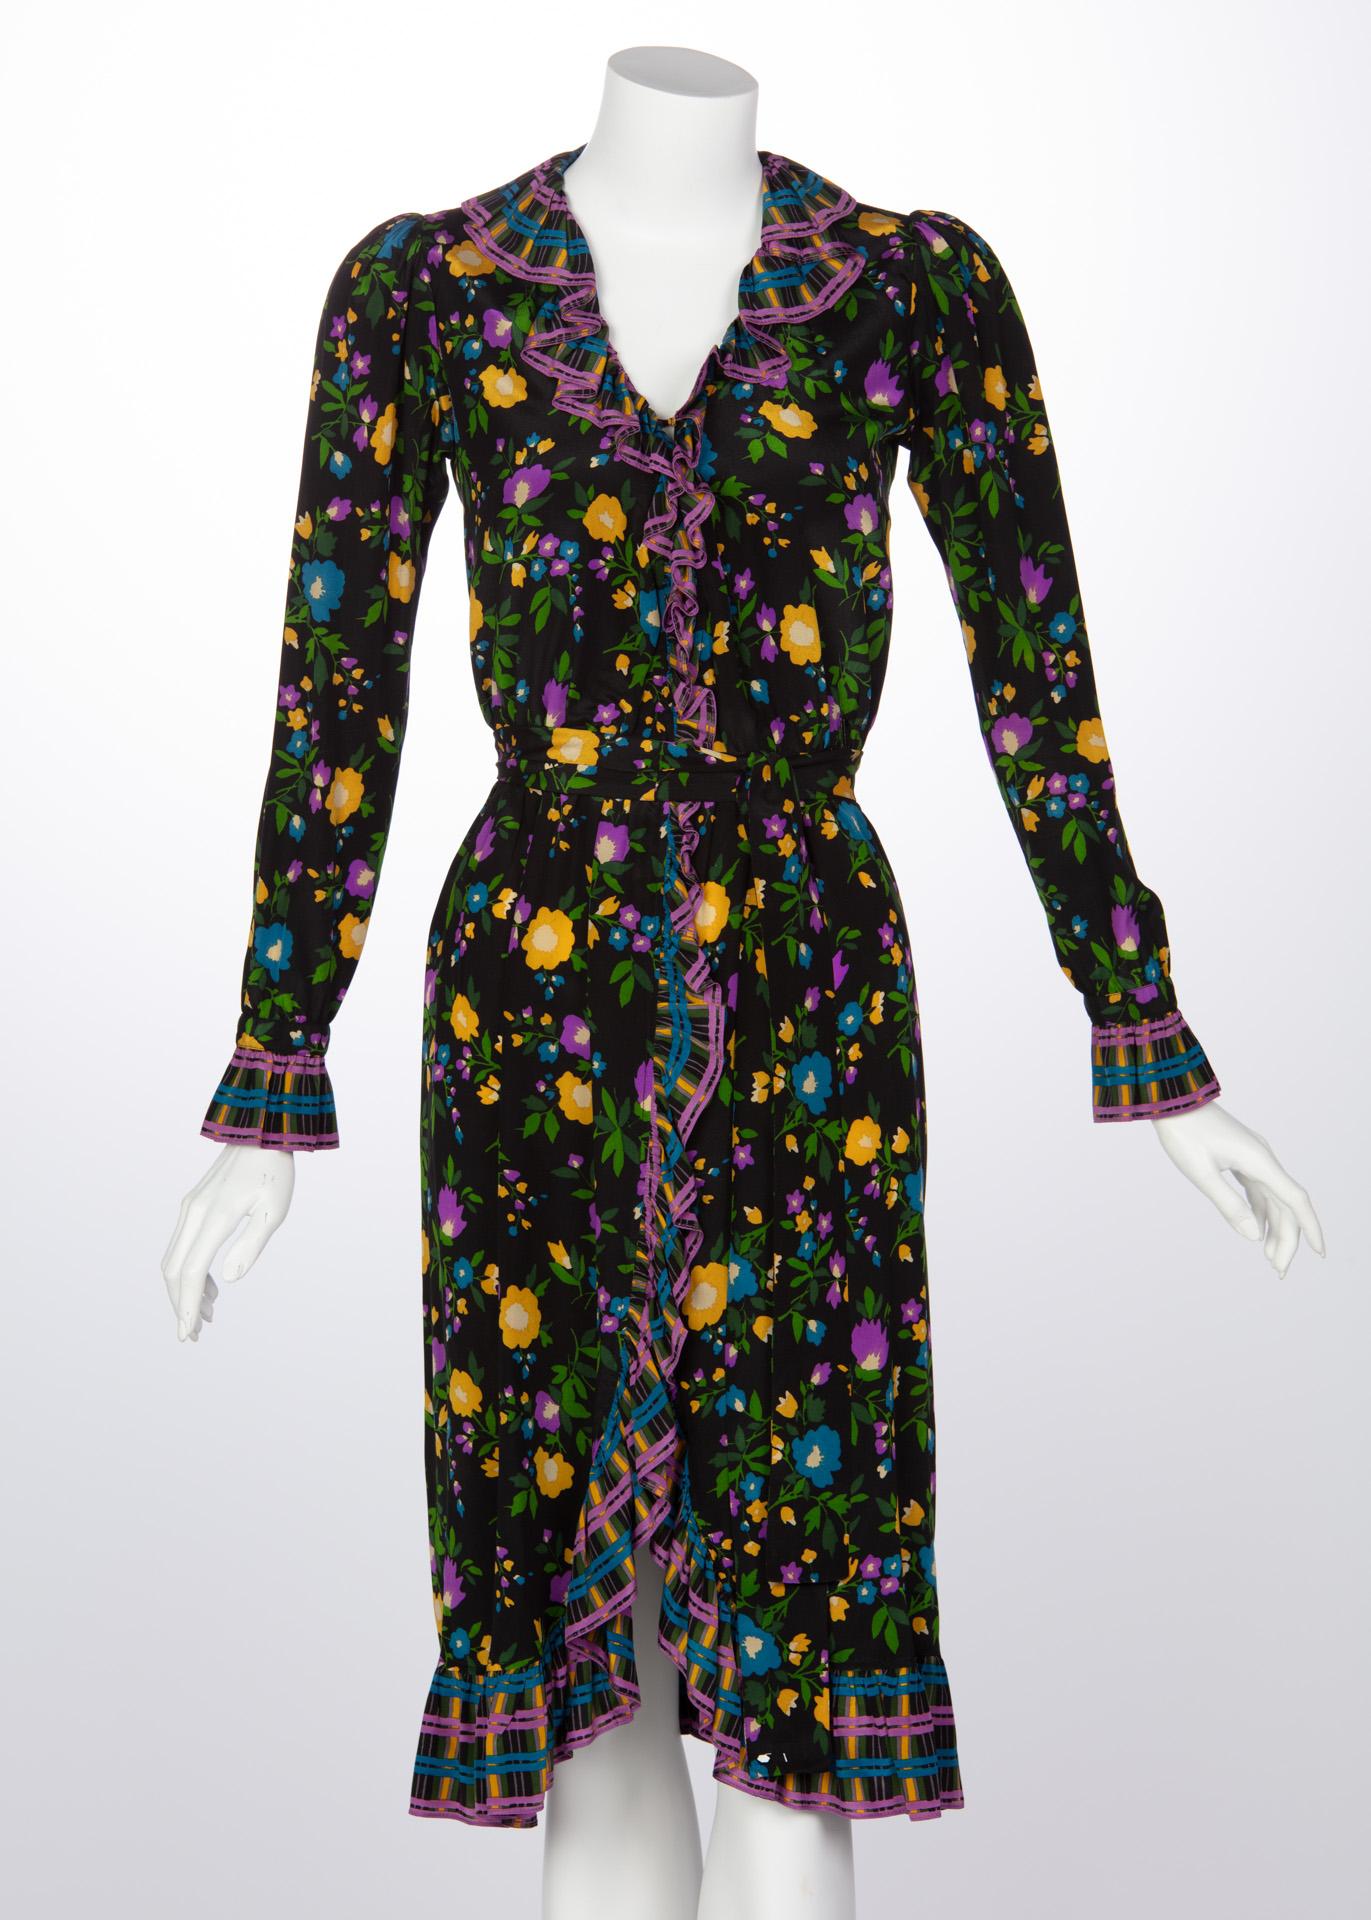 Feminine, fun, and a little flirty, this 1970s peasant dress superbly captures the stylish, vintage mystique of the decade. Saint Laurent’s appeal for art made vivid colors and prints strike across his designs in unconventional ways that draw the